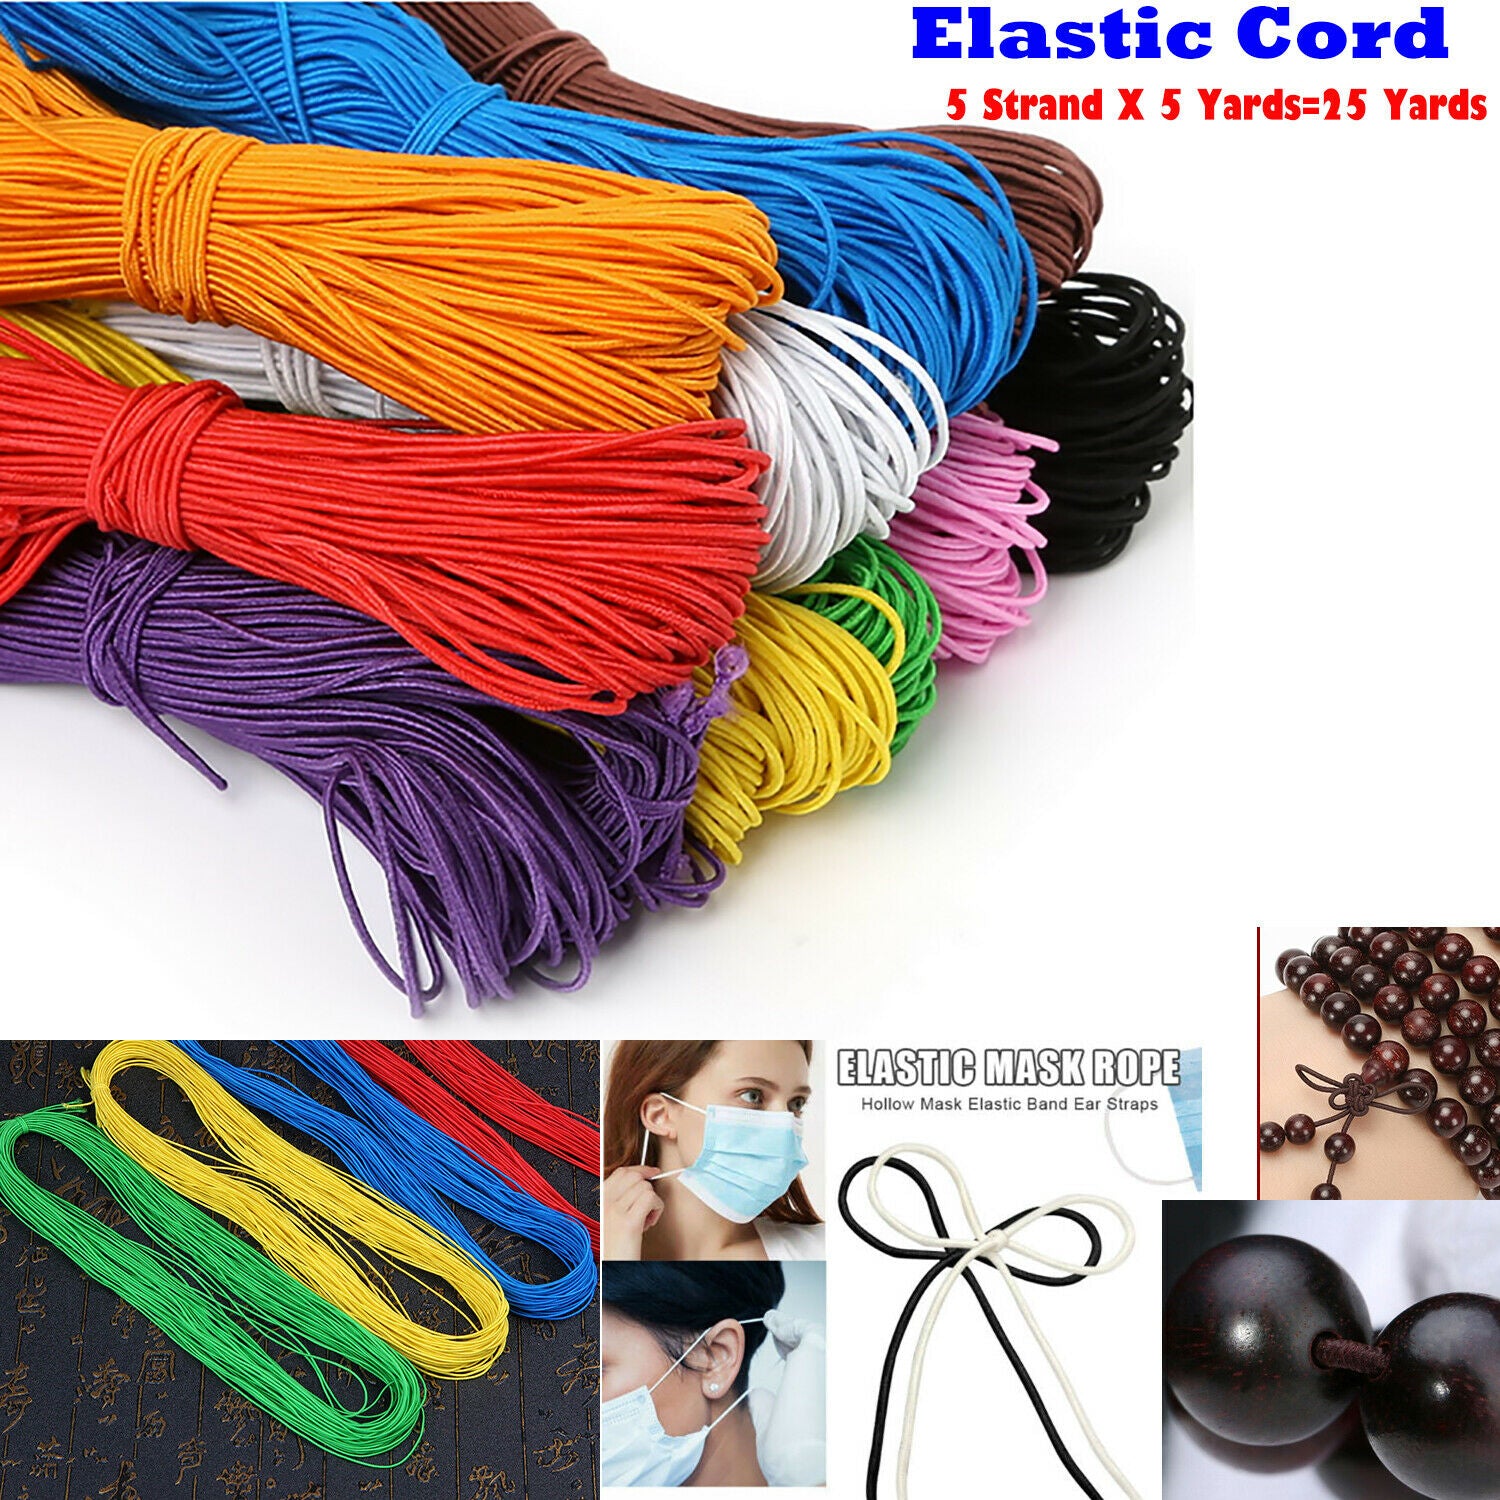 Syhood 30 Yards Color Wide Braided elastic band, String for India